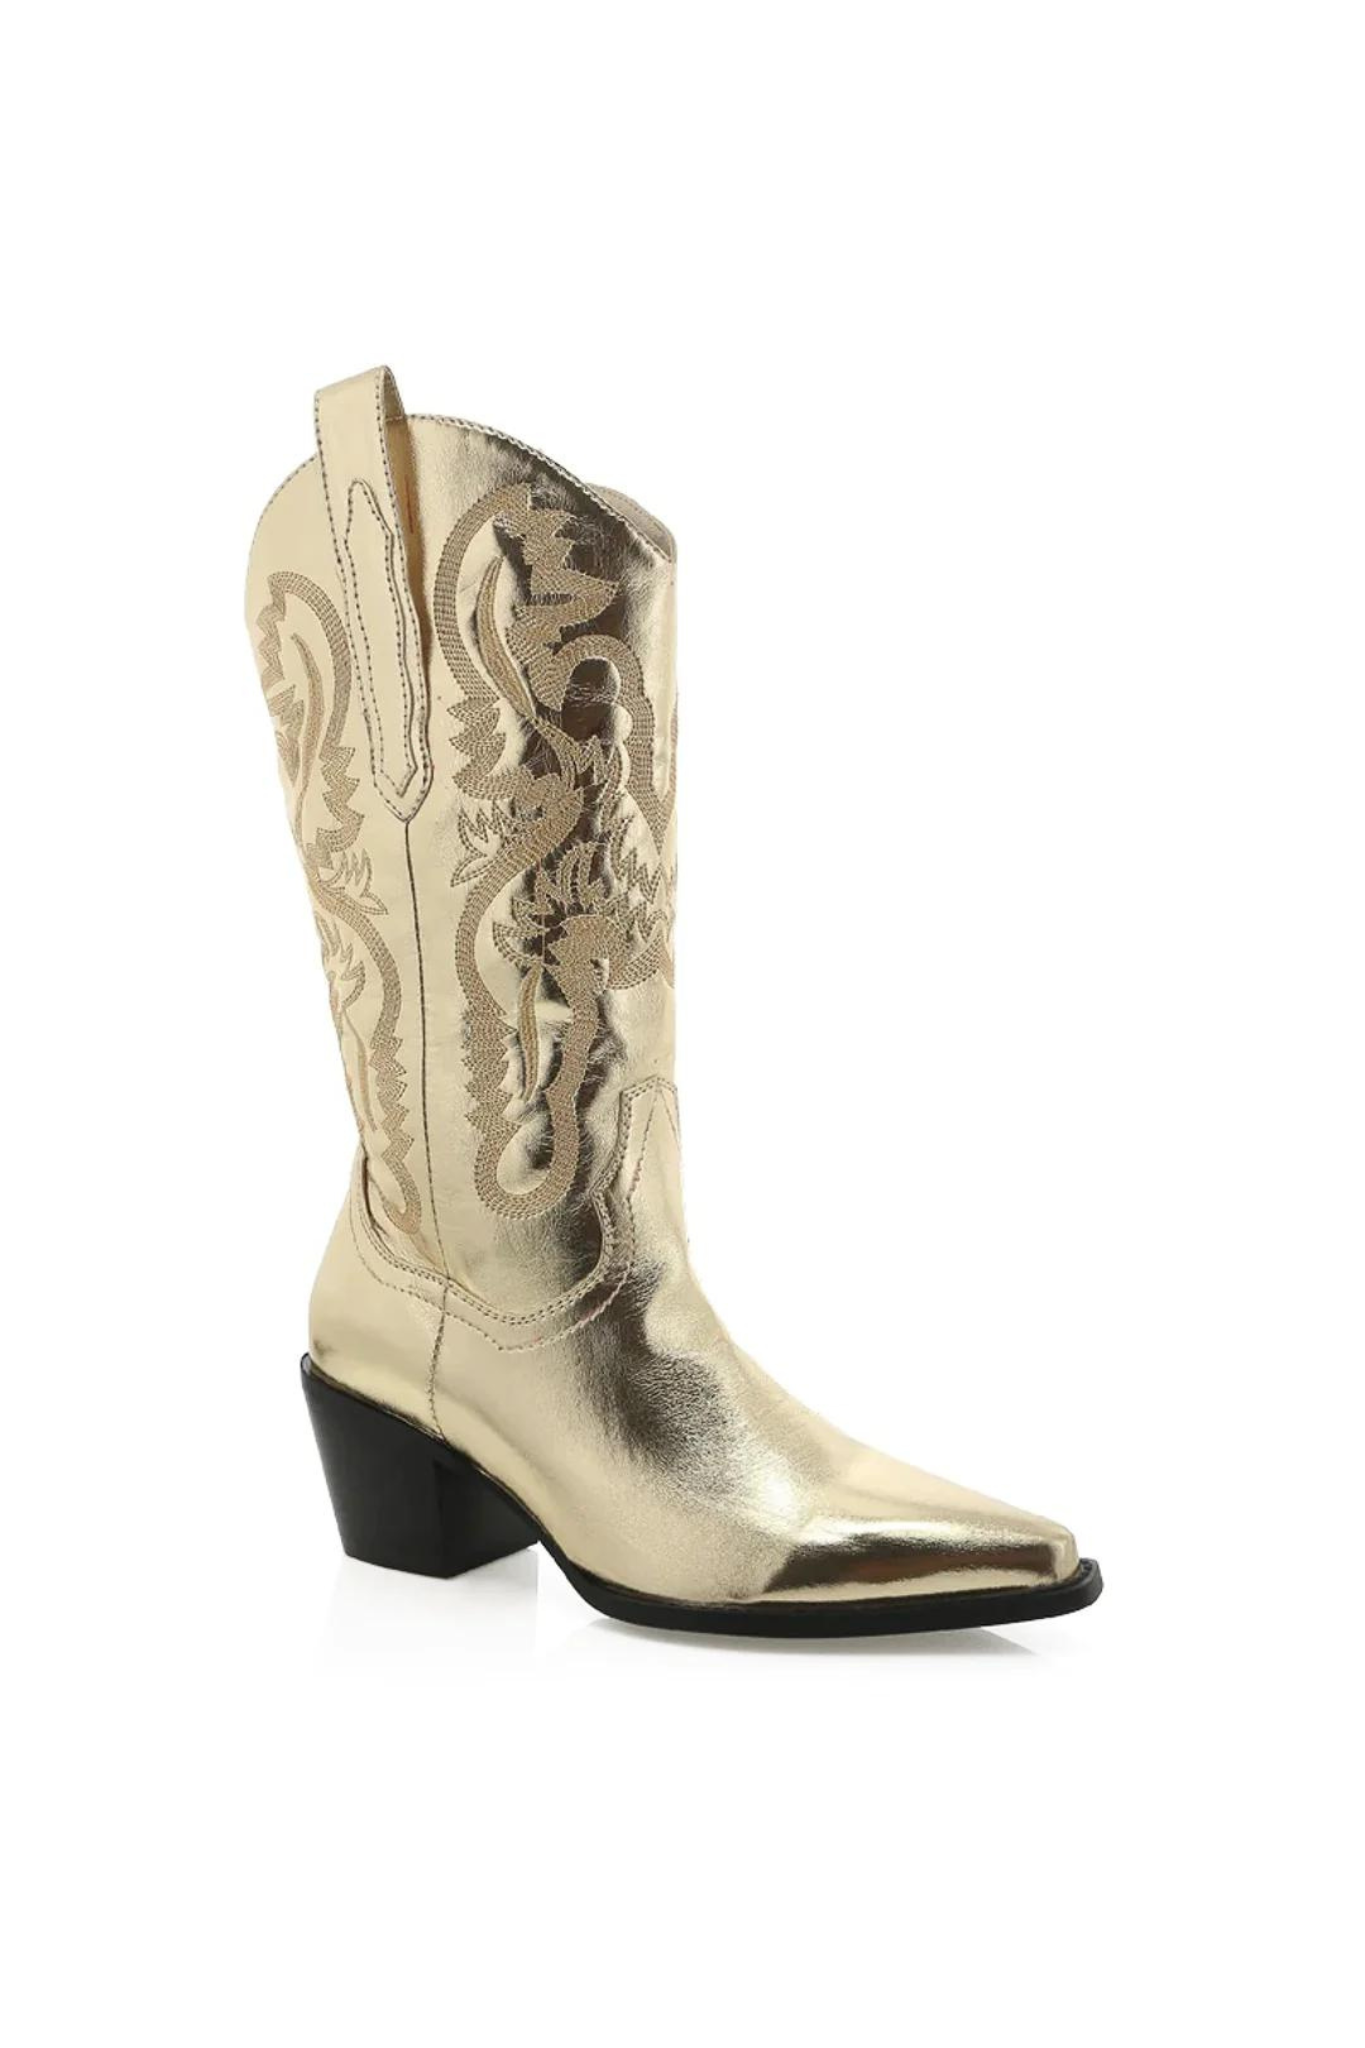 View 2 of Billini Danilo Western Boot, a Shoes from Larrea Cove. Detail: .